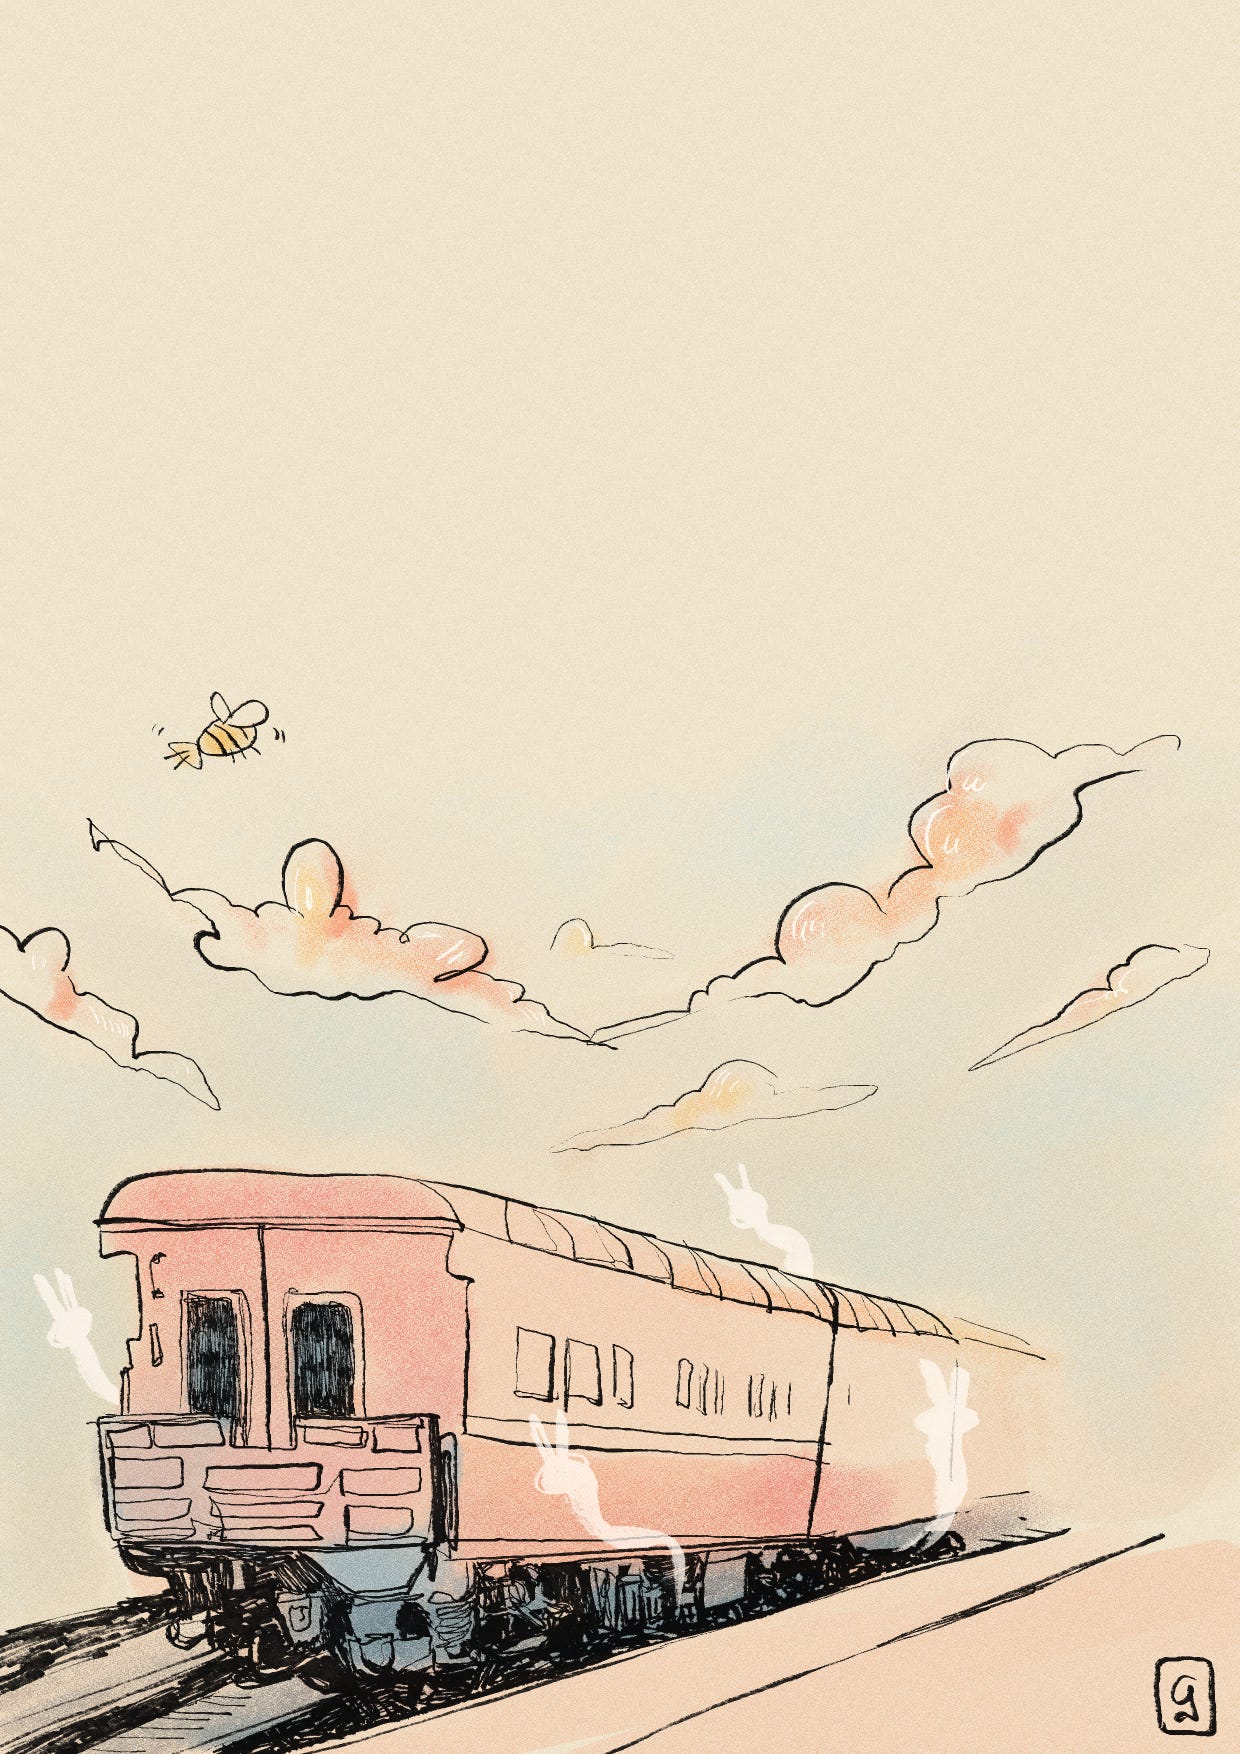 a drawing of a train in sunset by jess with clouds. it's a watercolour style image